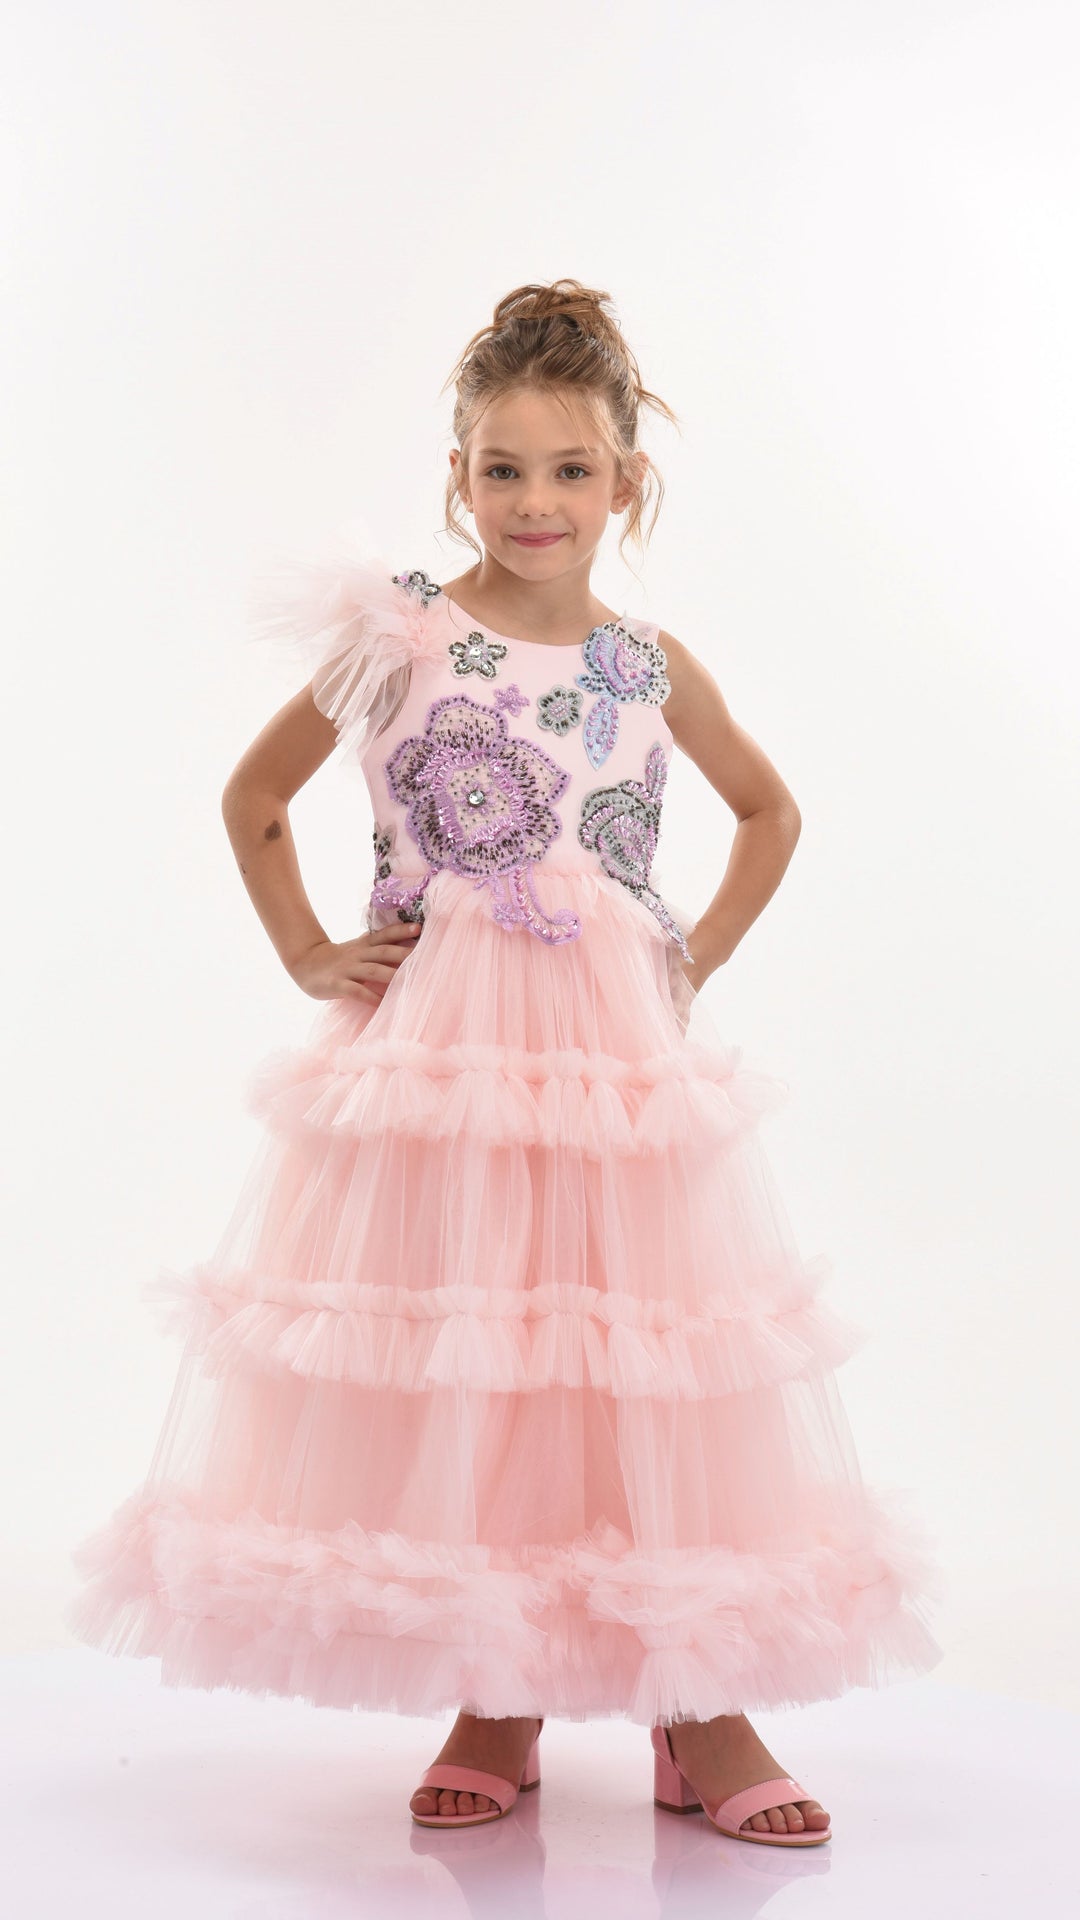 kids-atelier-tulleen-kid-girl-pink-lilac-floral-dress-ss19205